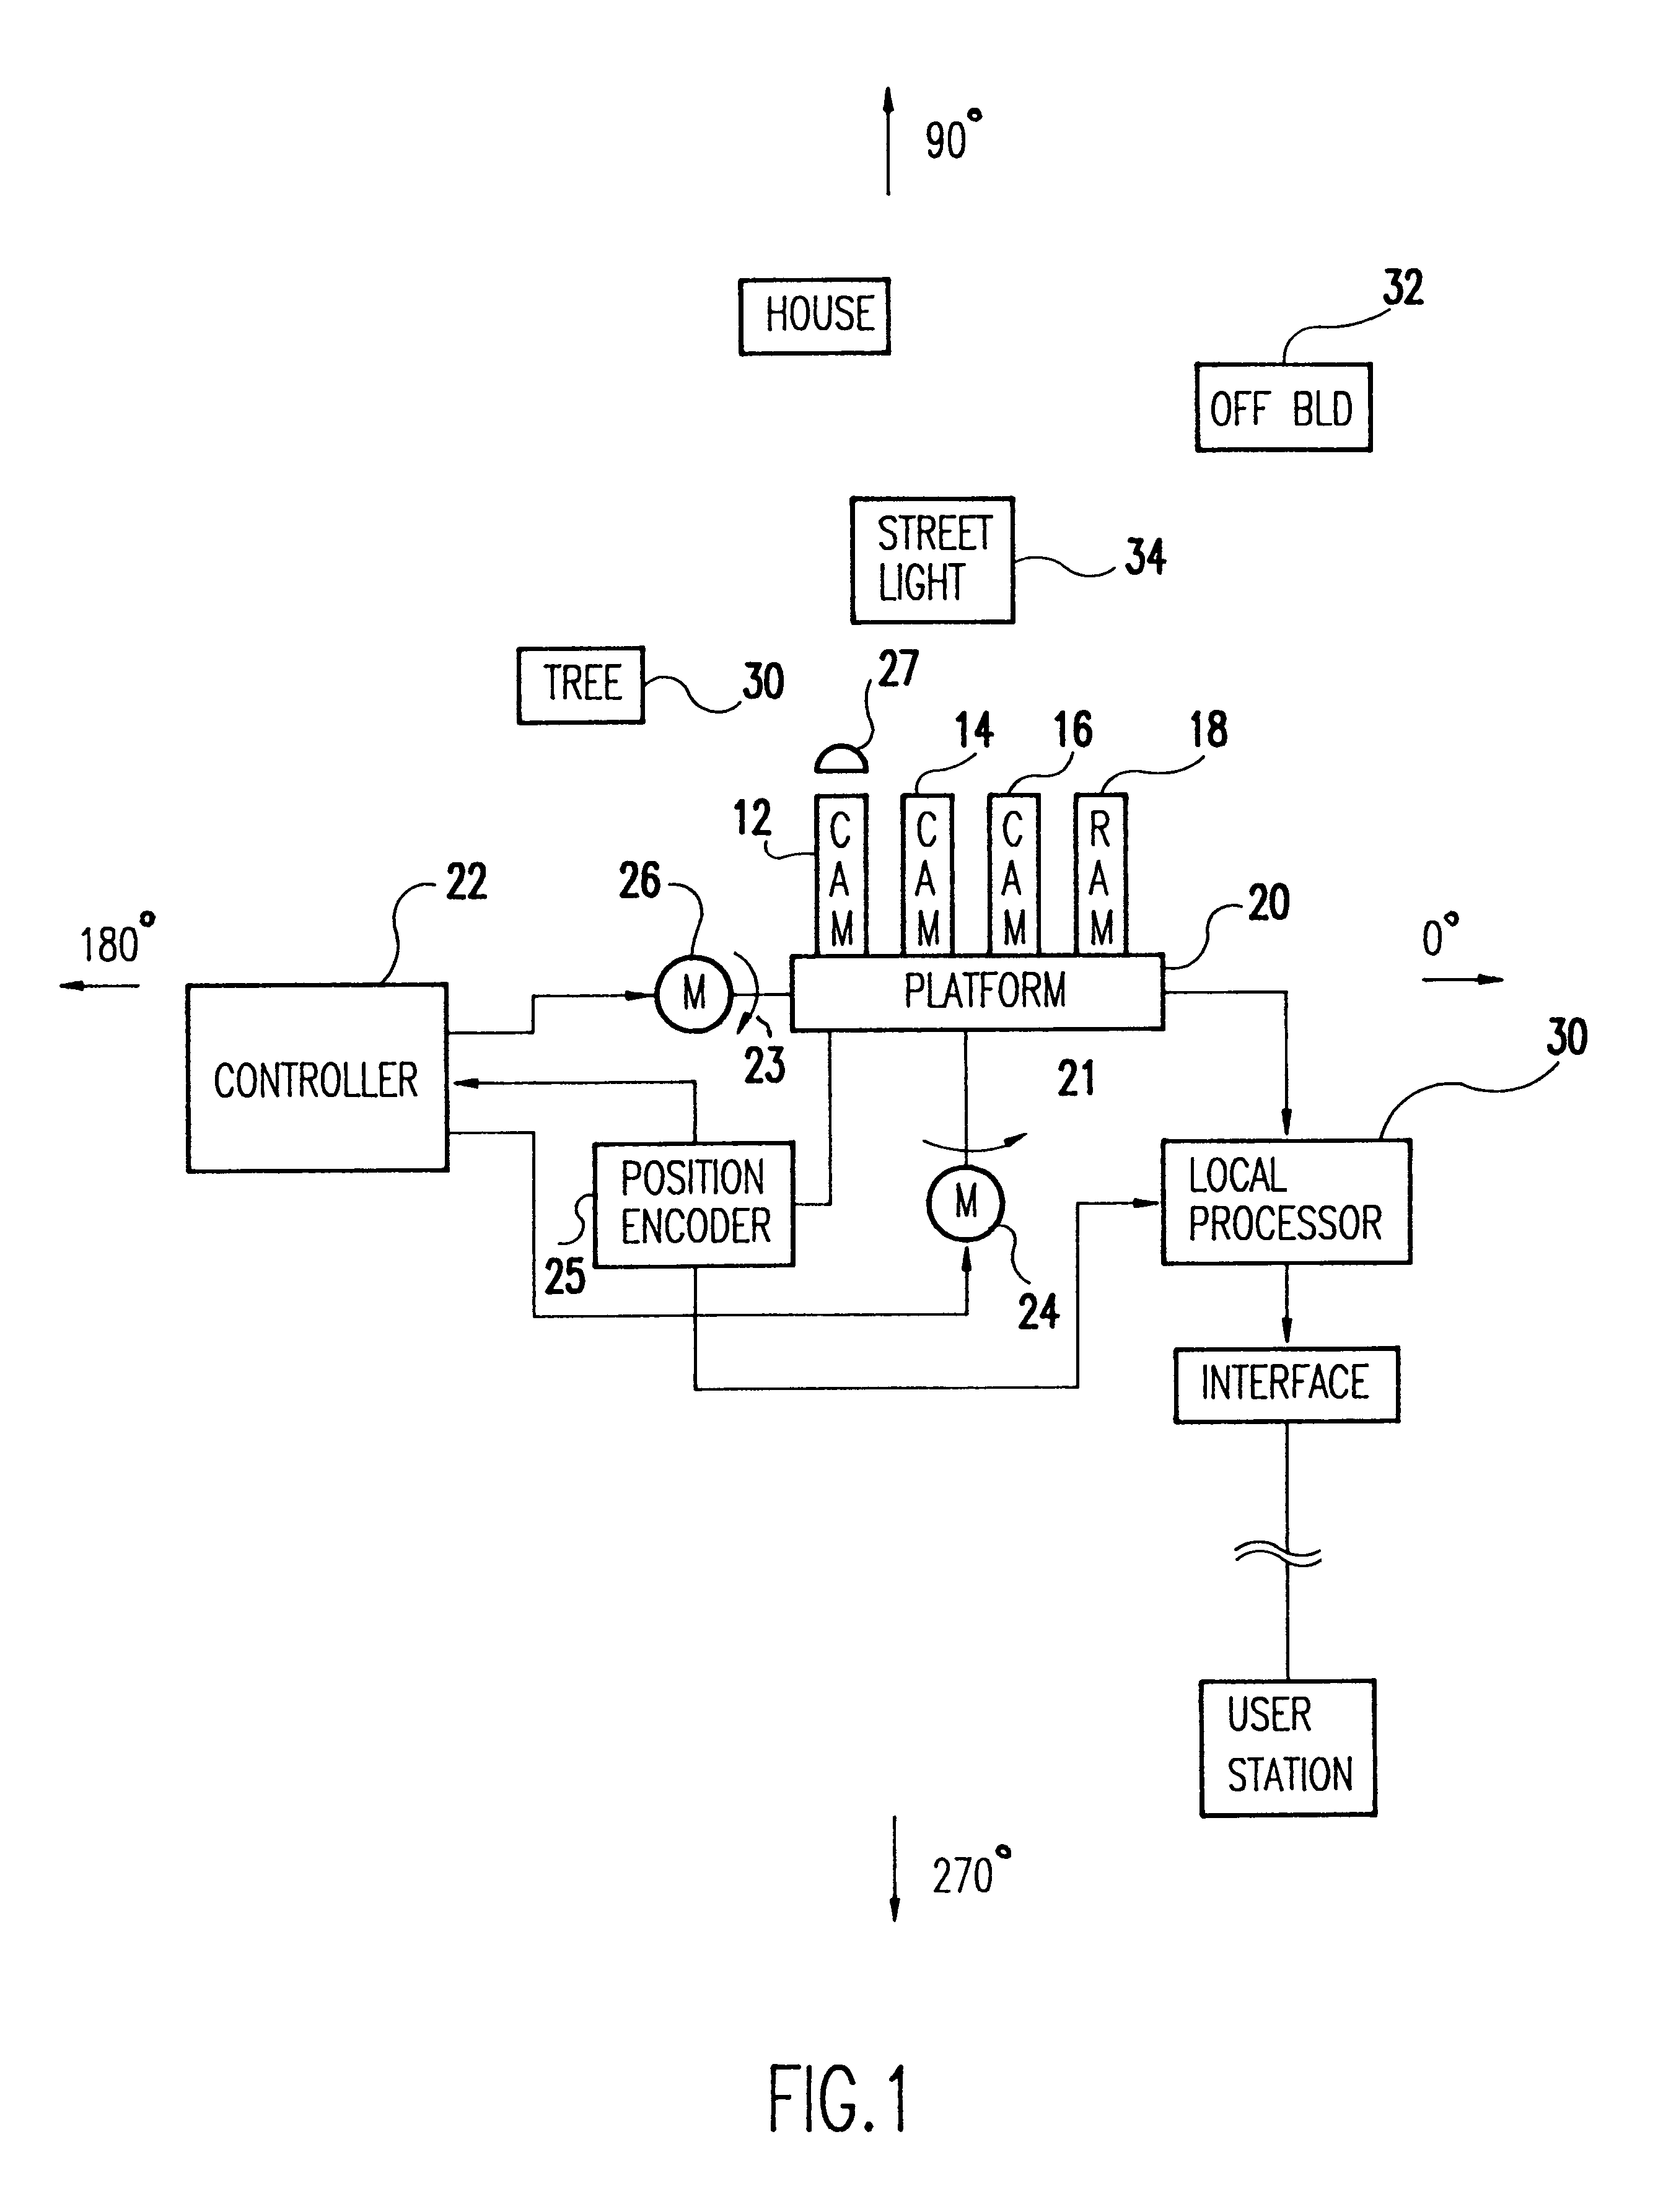 Apparatus and method for monitoring and reporting weather conditions